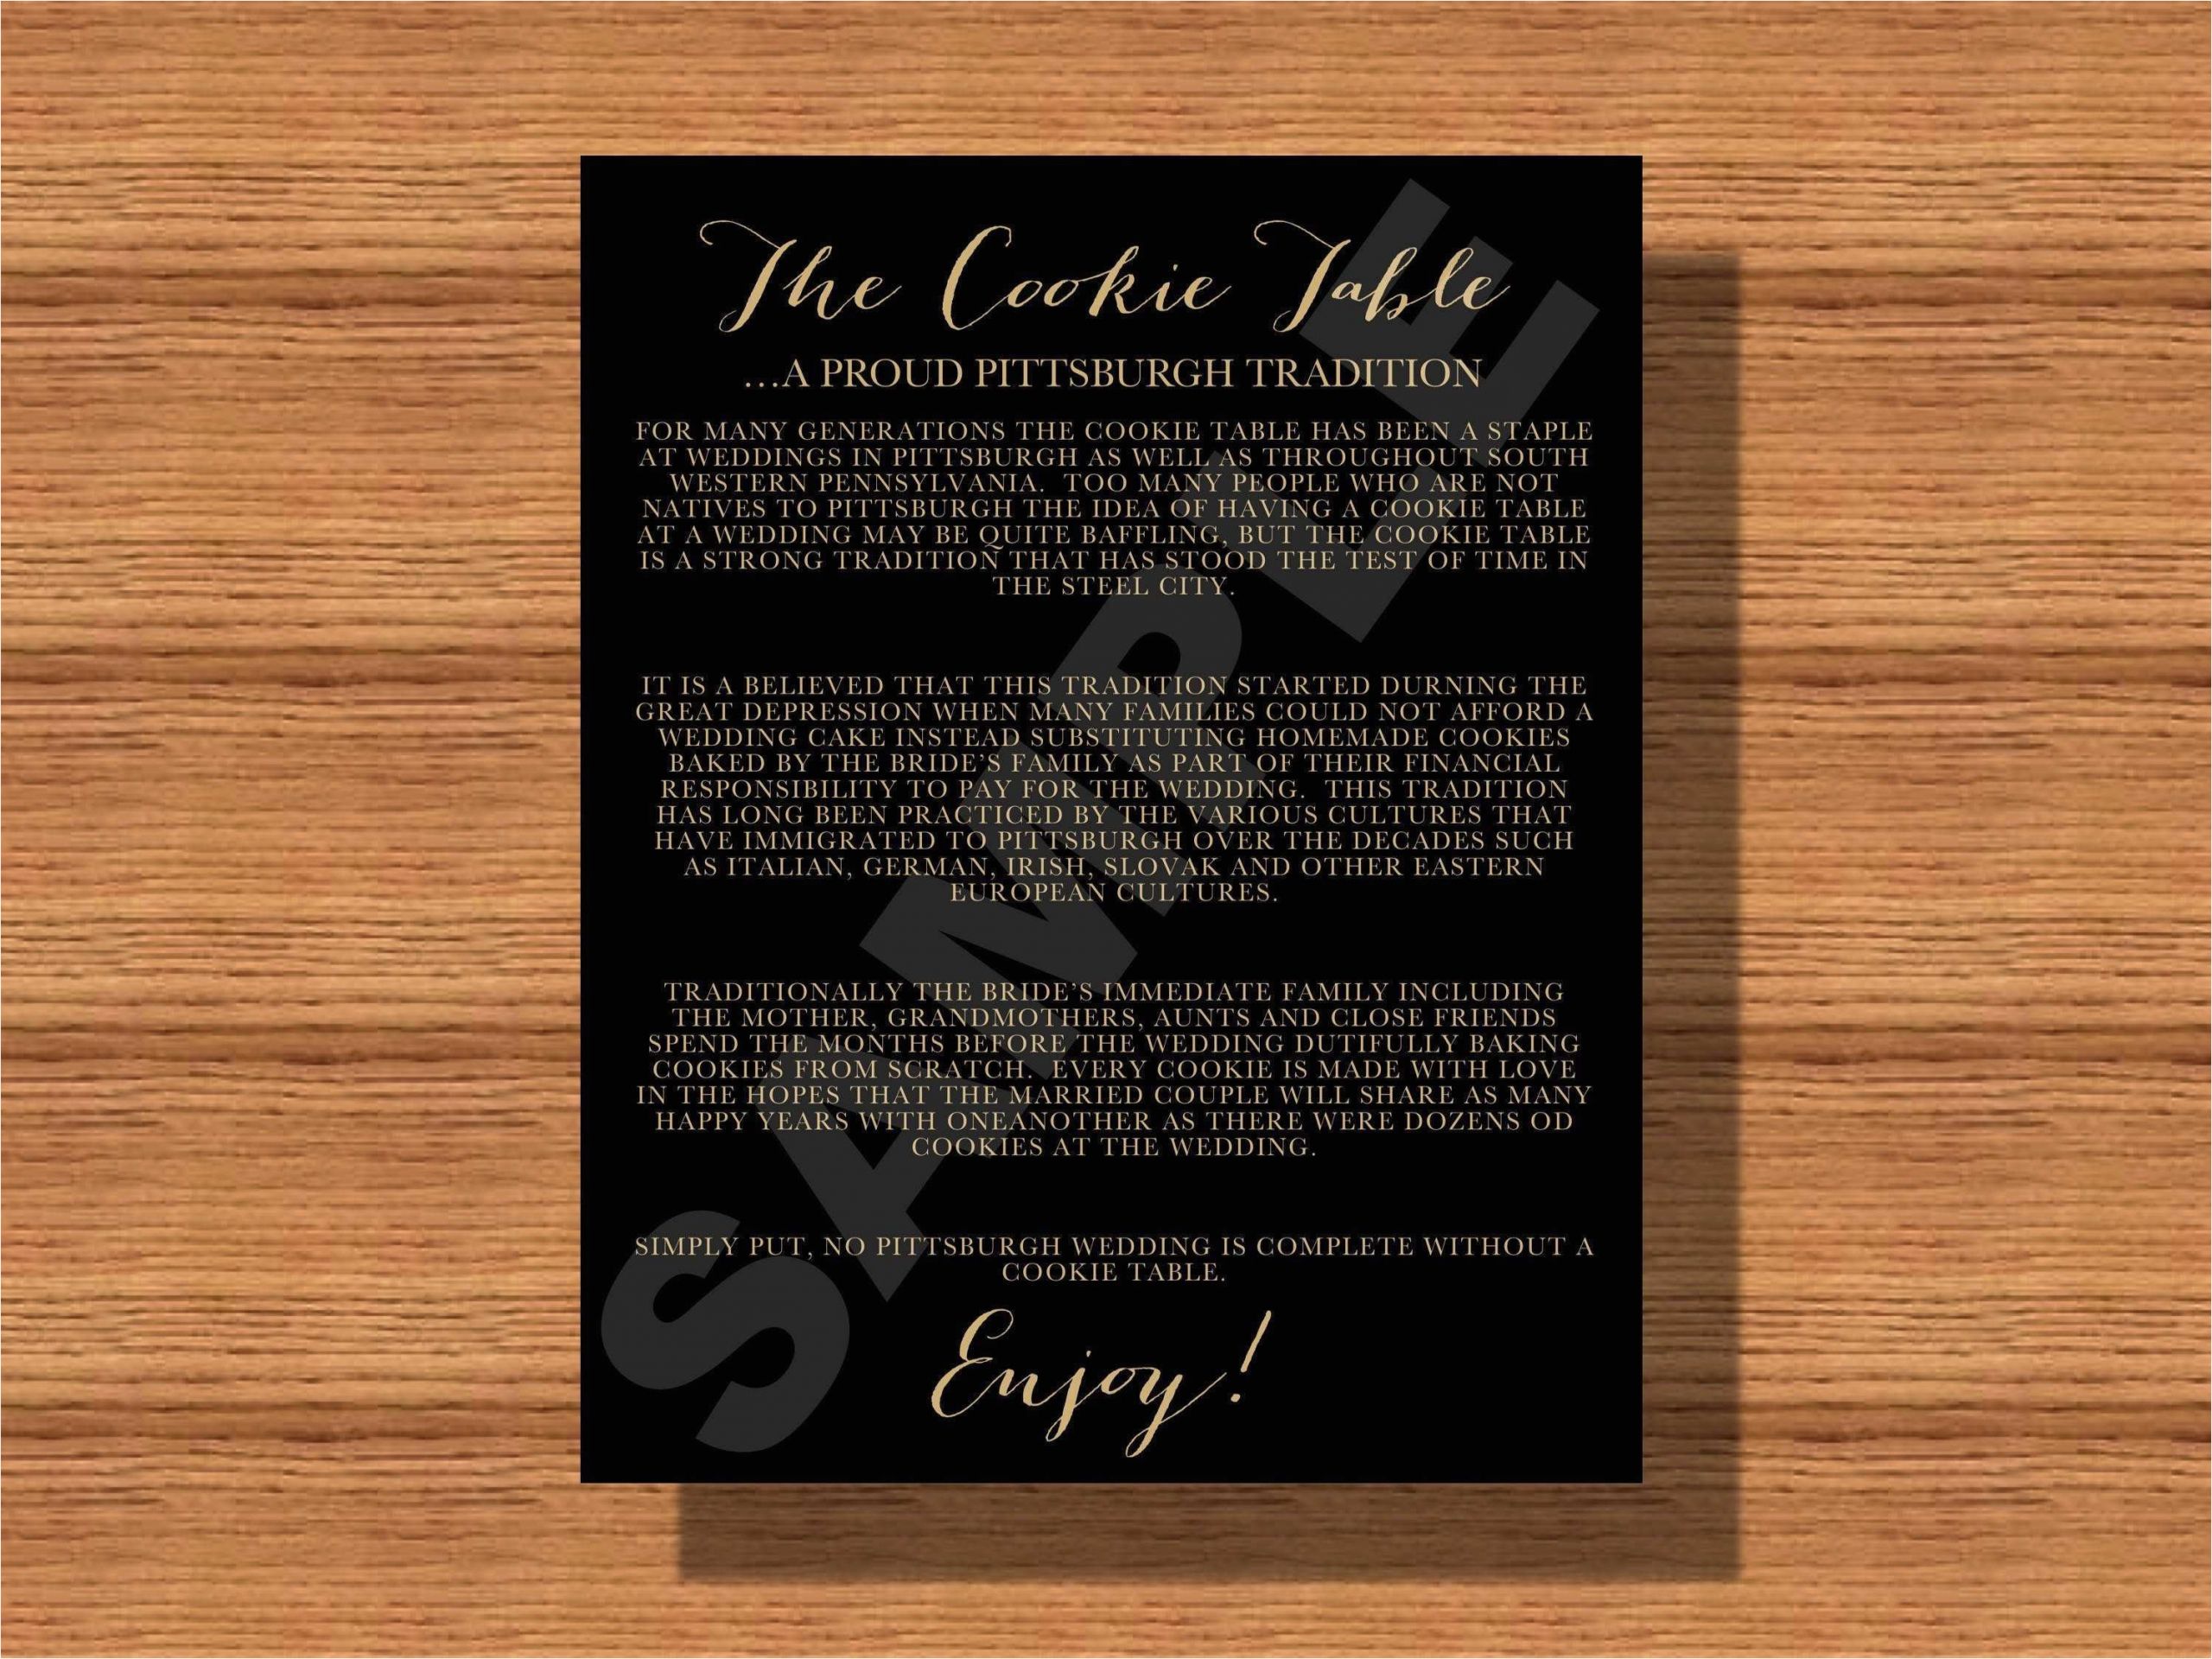 11 blank cooking party invitation template free psd file by cooking party invitation template free jpg